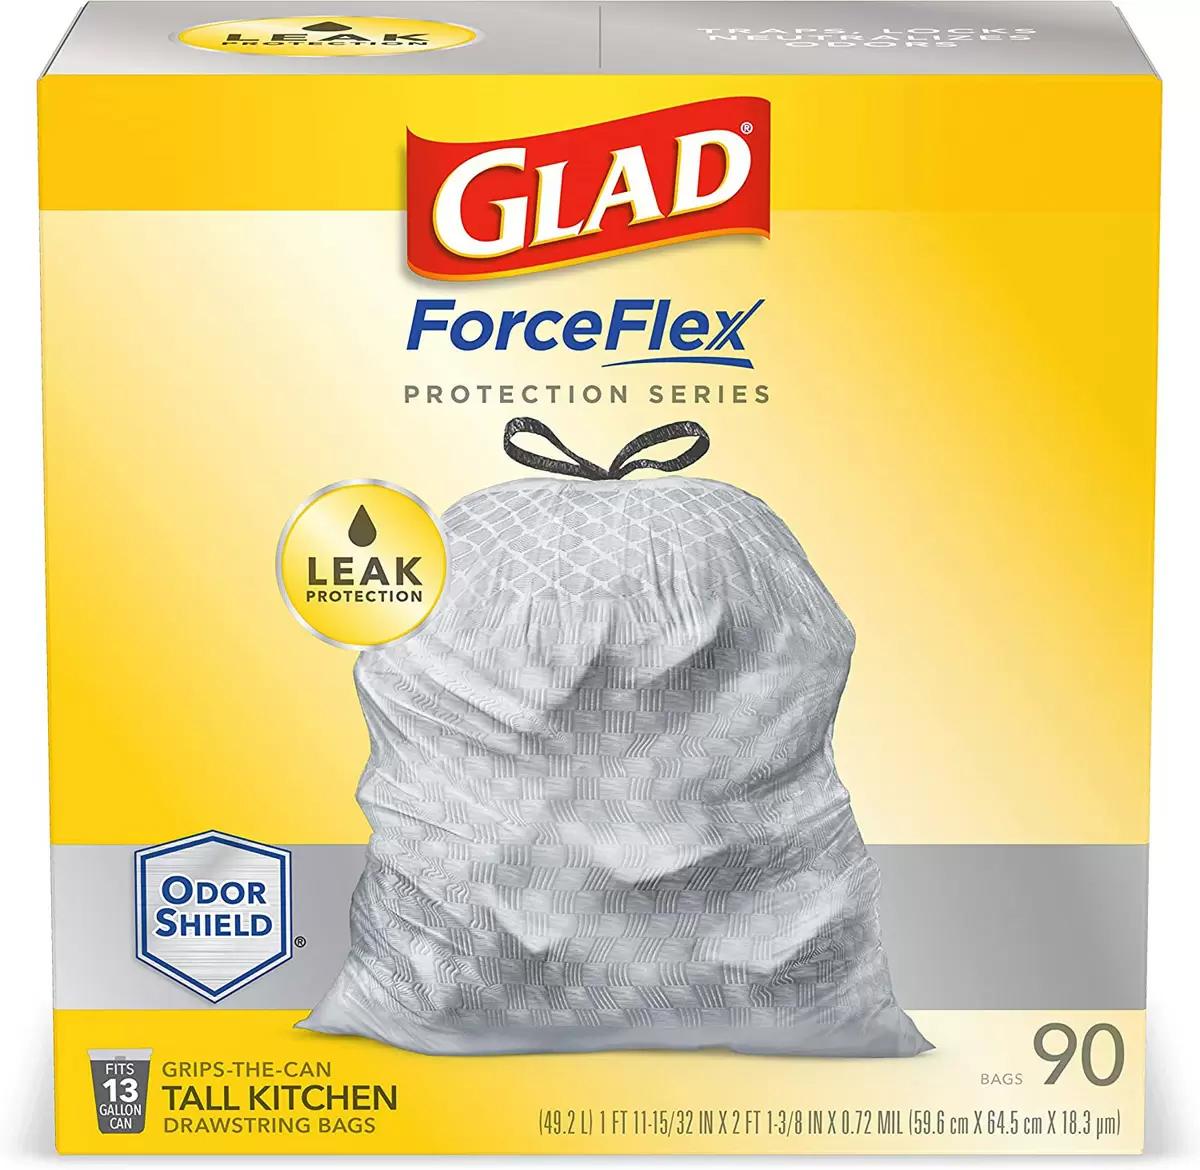 90 Glad ForceFlex Tall Kitchen Drawstring Trash Bags for $9.78 Shipped